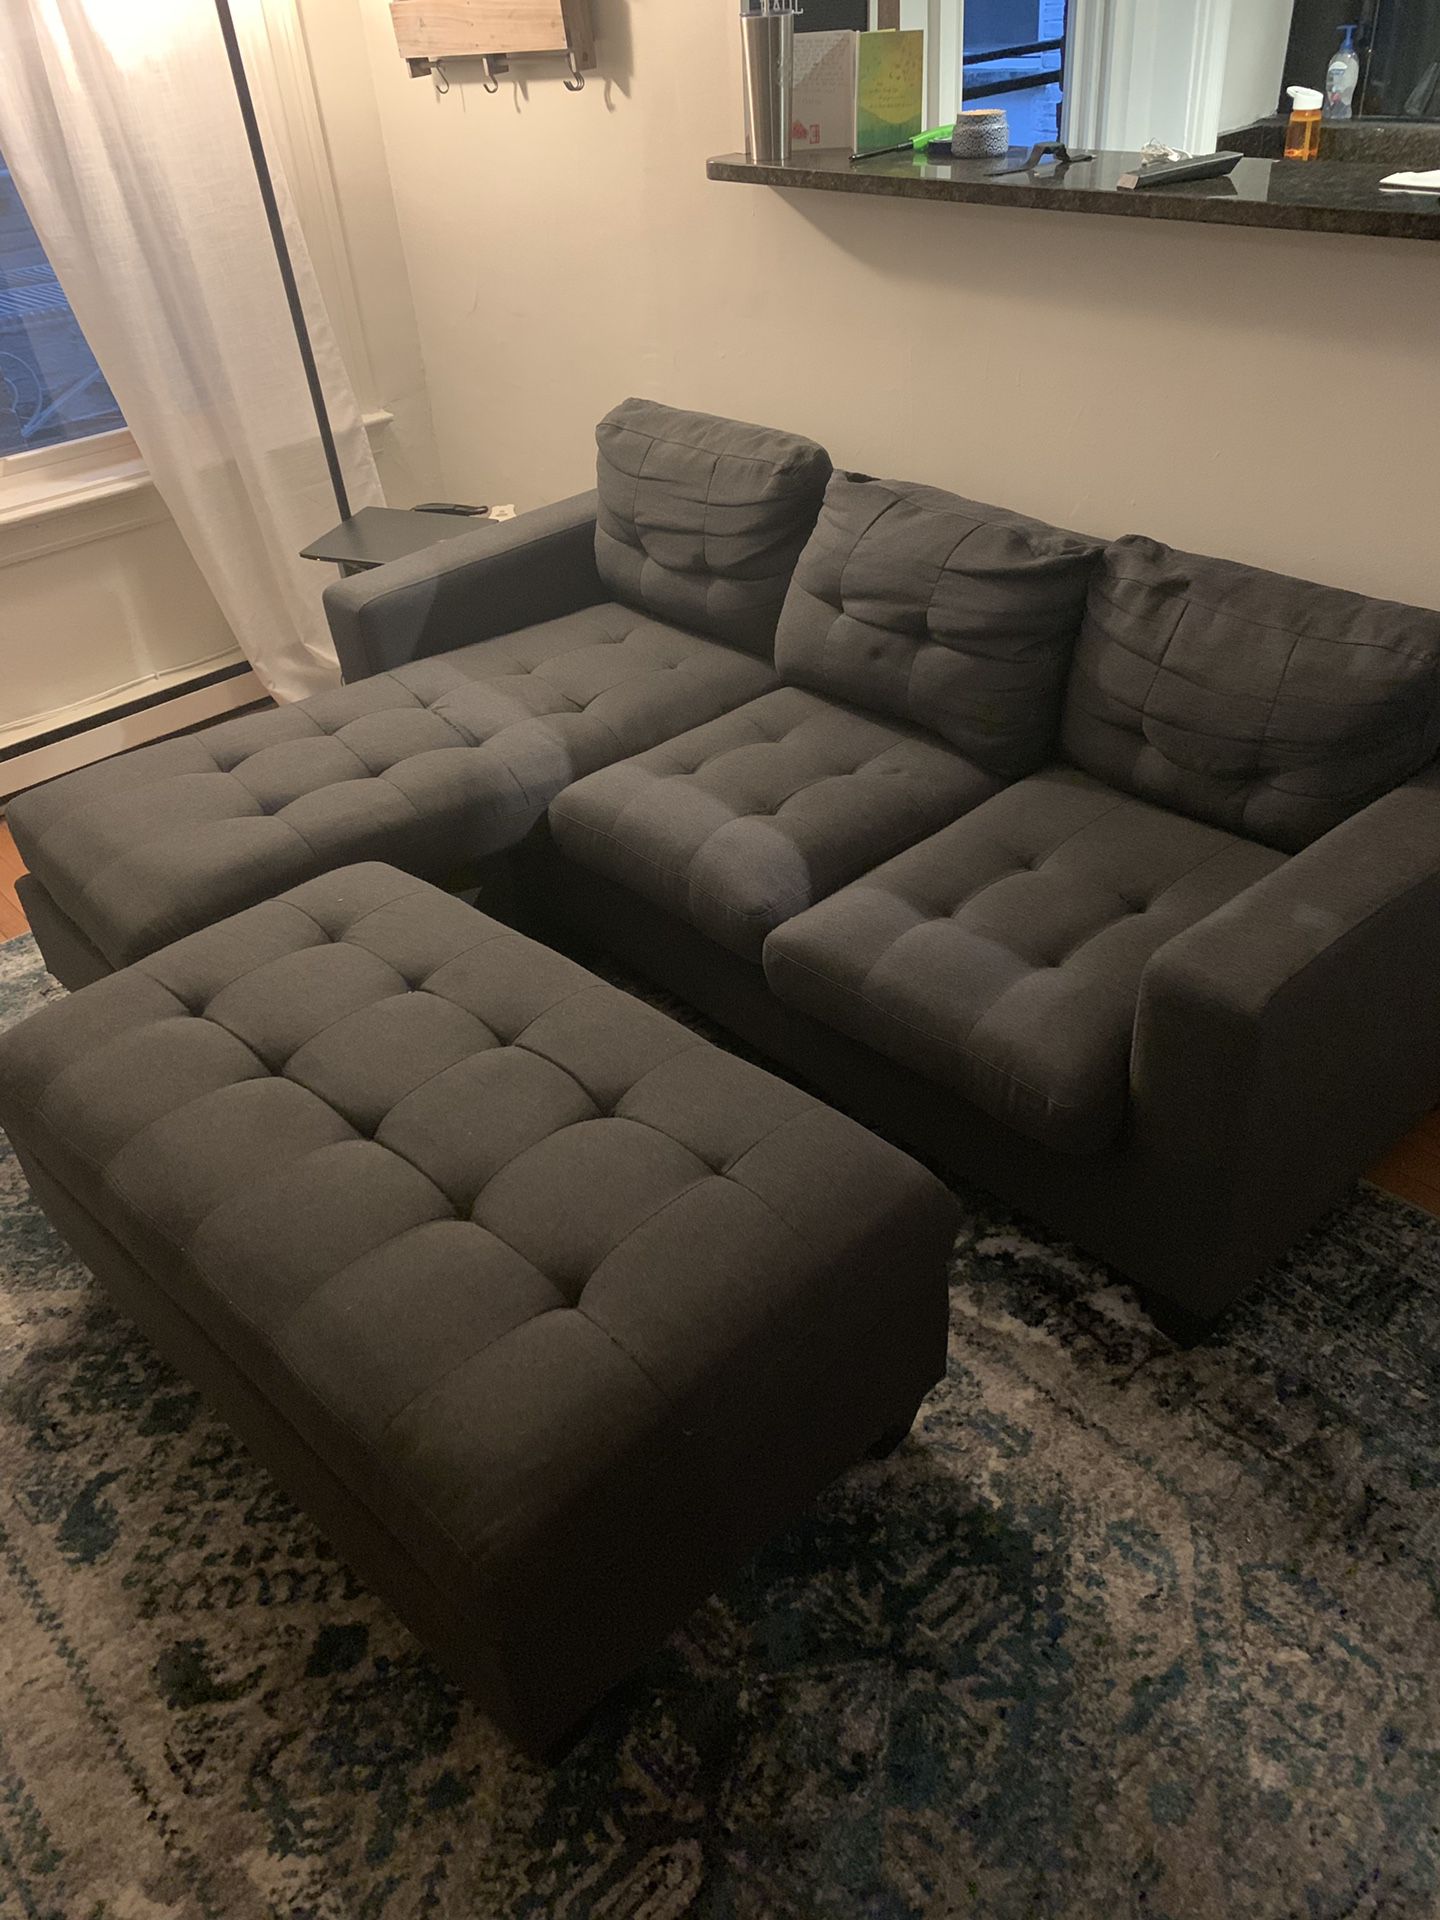 Gently used Couch and ottoman (MUST PICK UP) $200 OBO